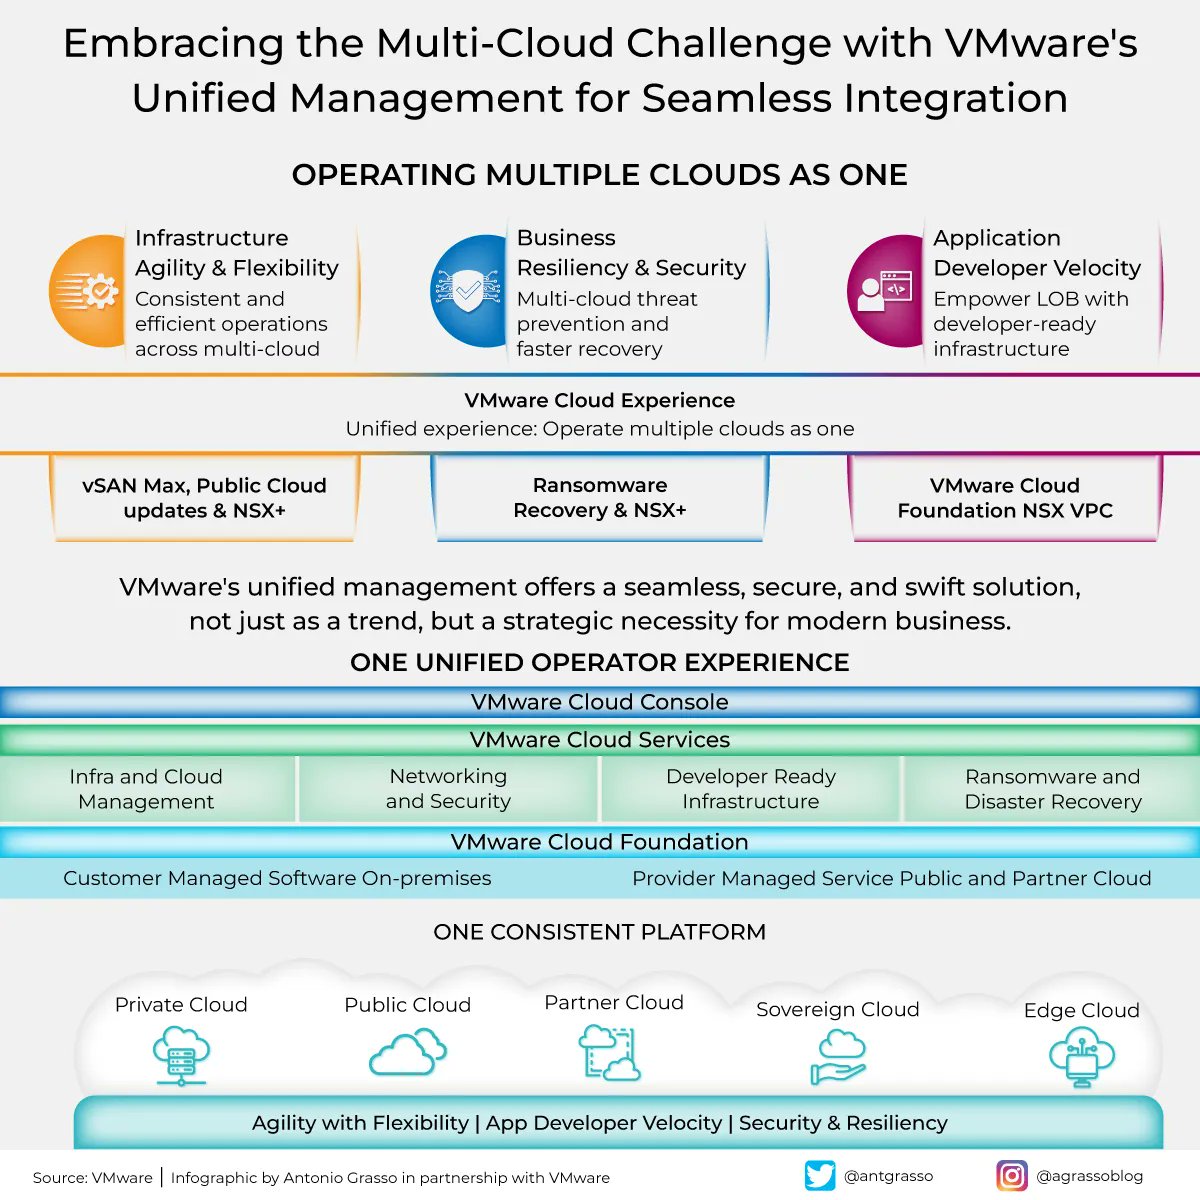 With 83% of enterprises using diverse cloud environments, and 78% of executives facing complexity, VMware's unified approach offers a seamless solution vital for modern business.

More > vmware.com/explore

Paid partnership with @VMware.

#VMwareEvangelist #MultiCloud